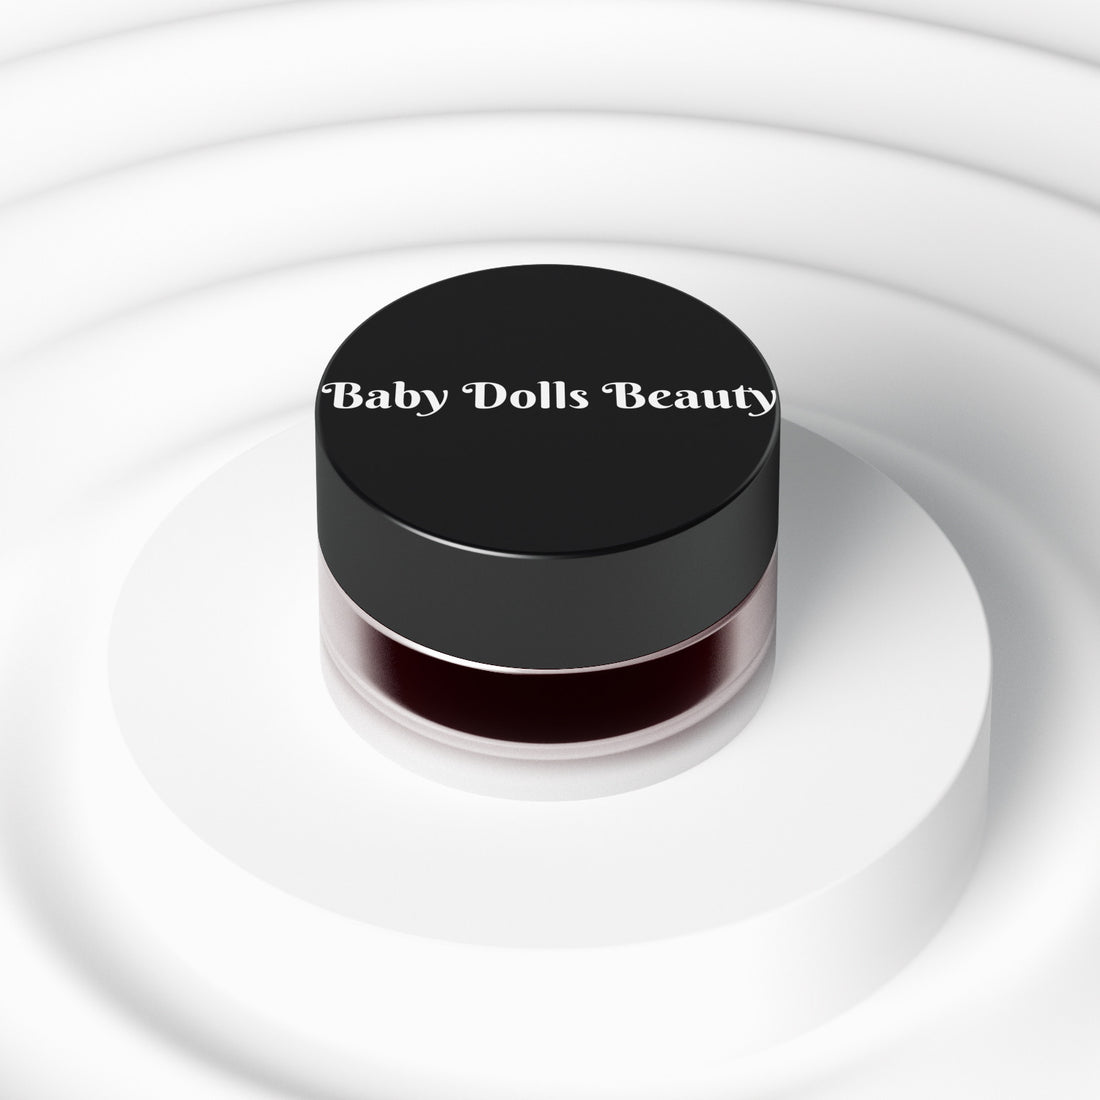 Achieve Flawless Brows and Radiant Skin with Baby Dolls Beauty's Cosmetics